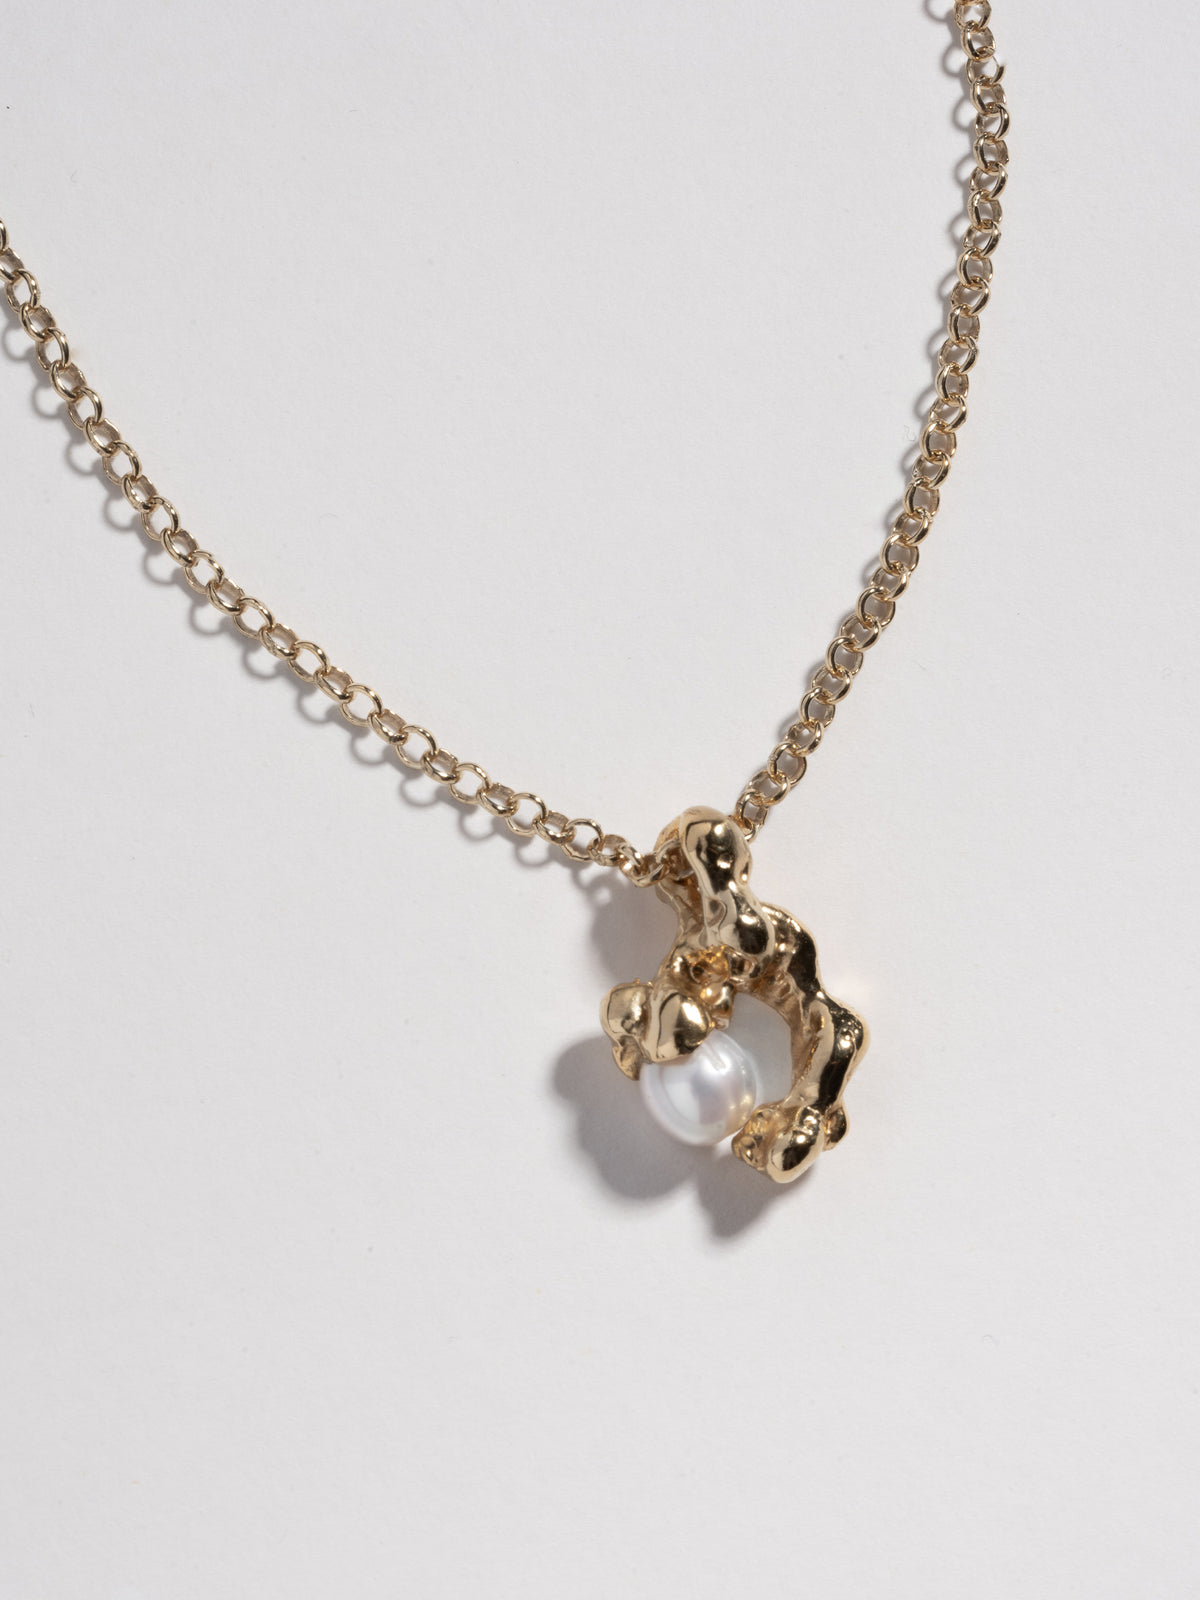 Close up image of 14k gold plated FELLINI Necklace pendant with white freshwater pearl